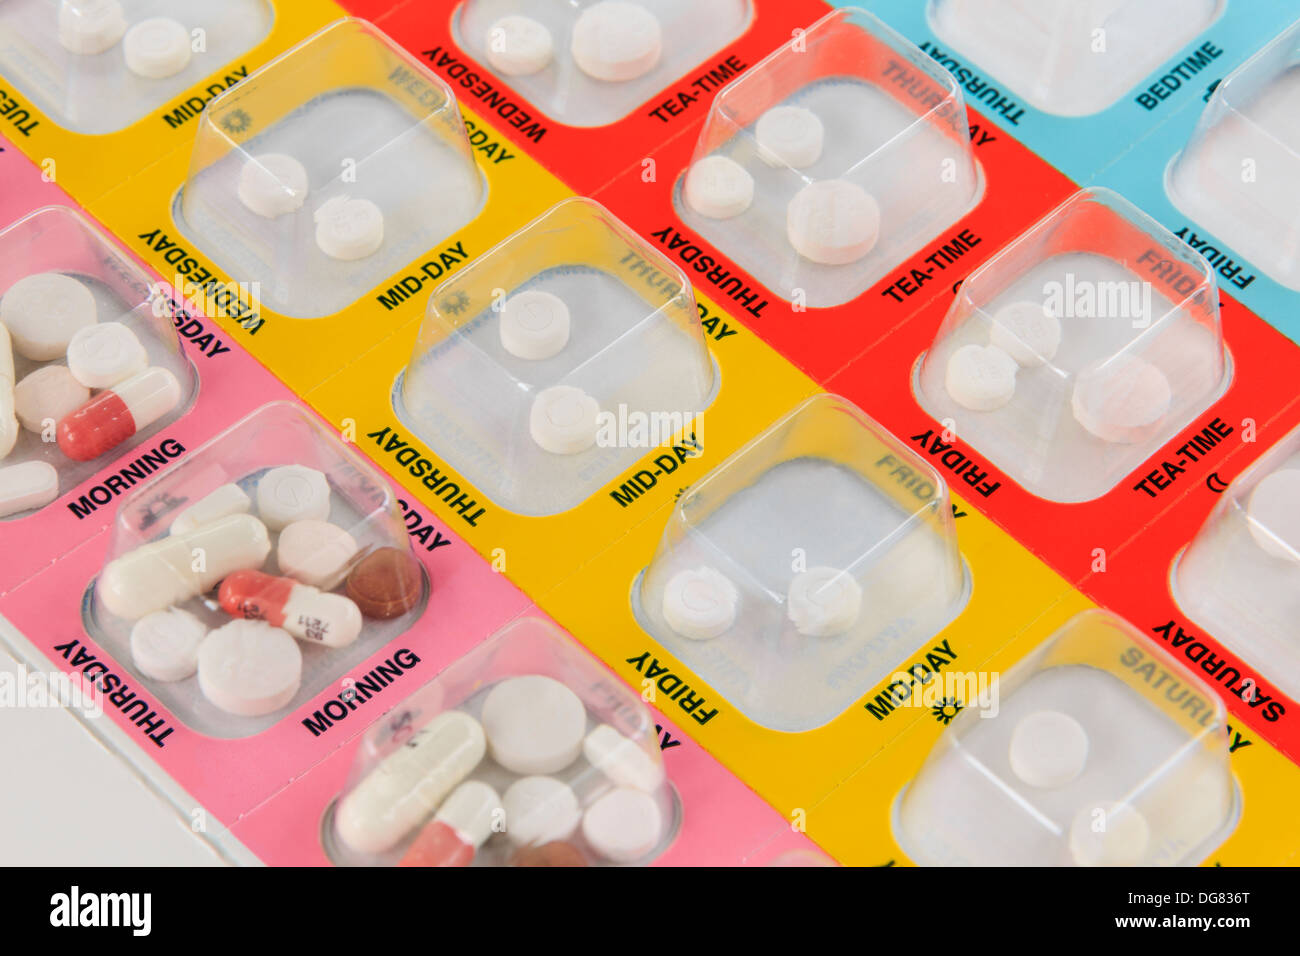 Medicine Manager colour coded blister pack with seven days of medication pills four times per day every day. England UK Stock Photo